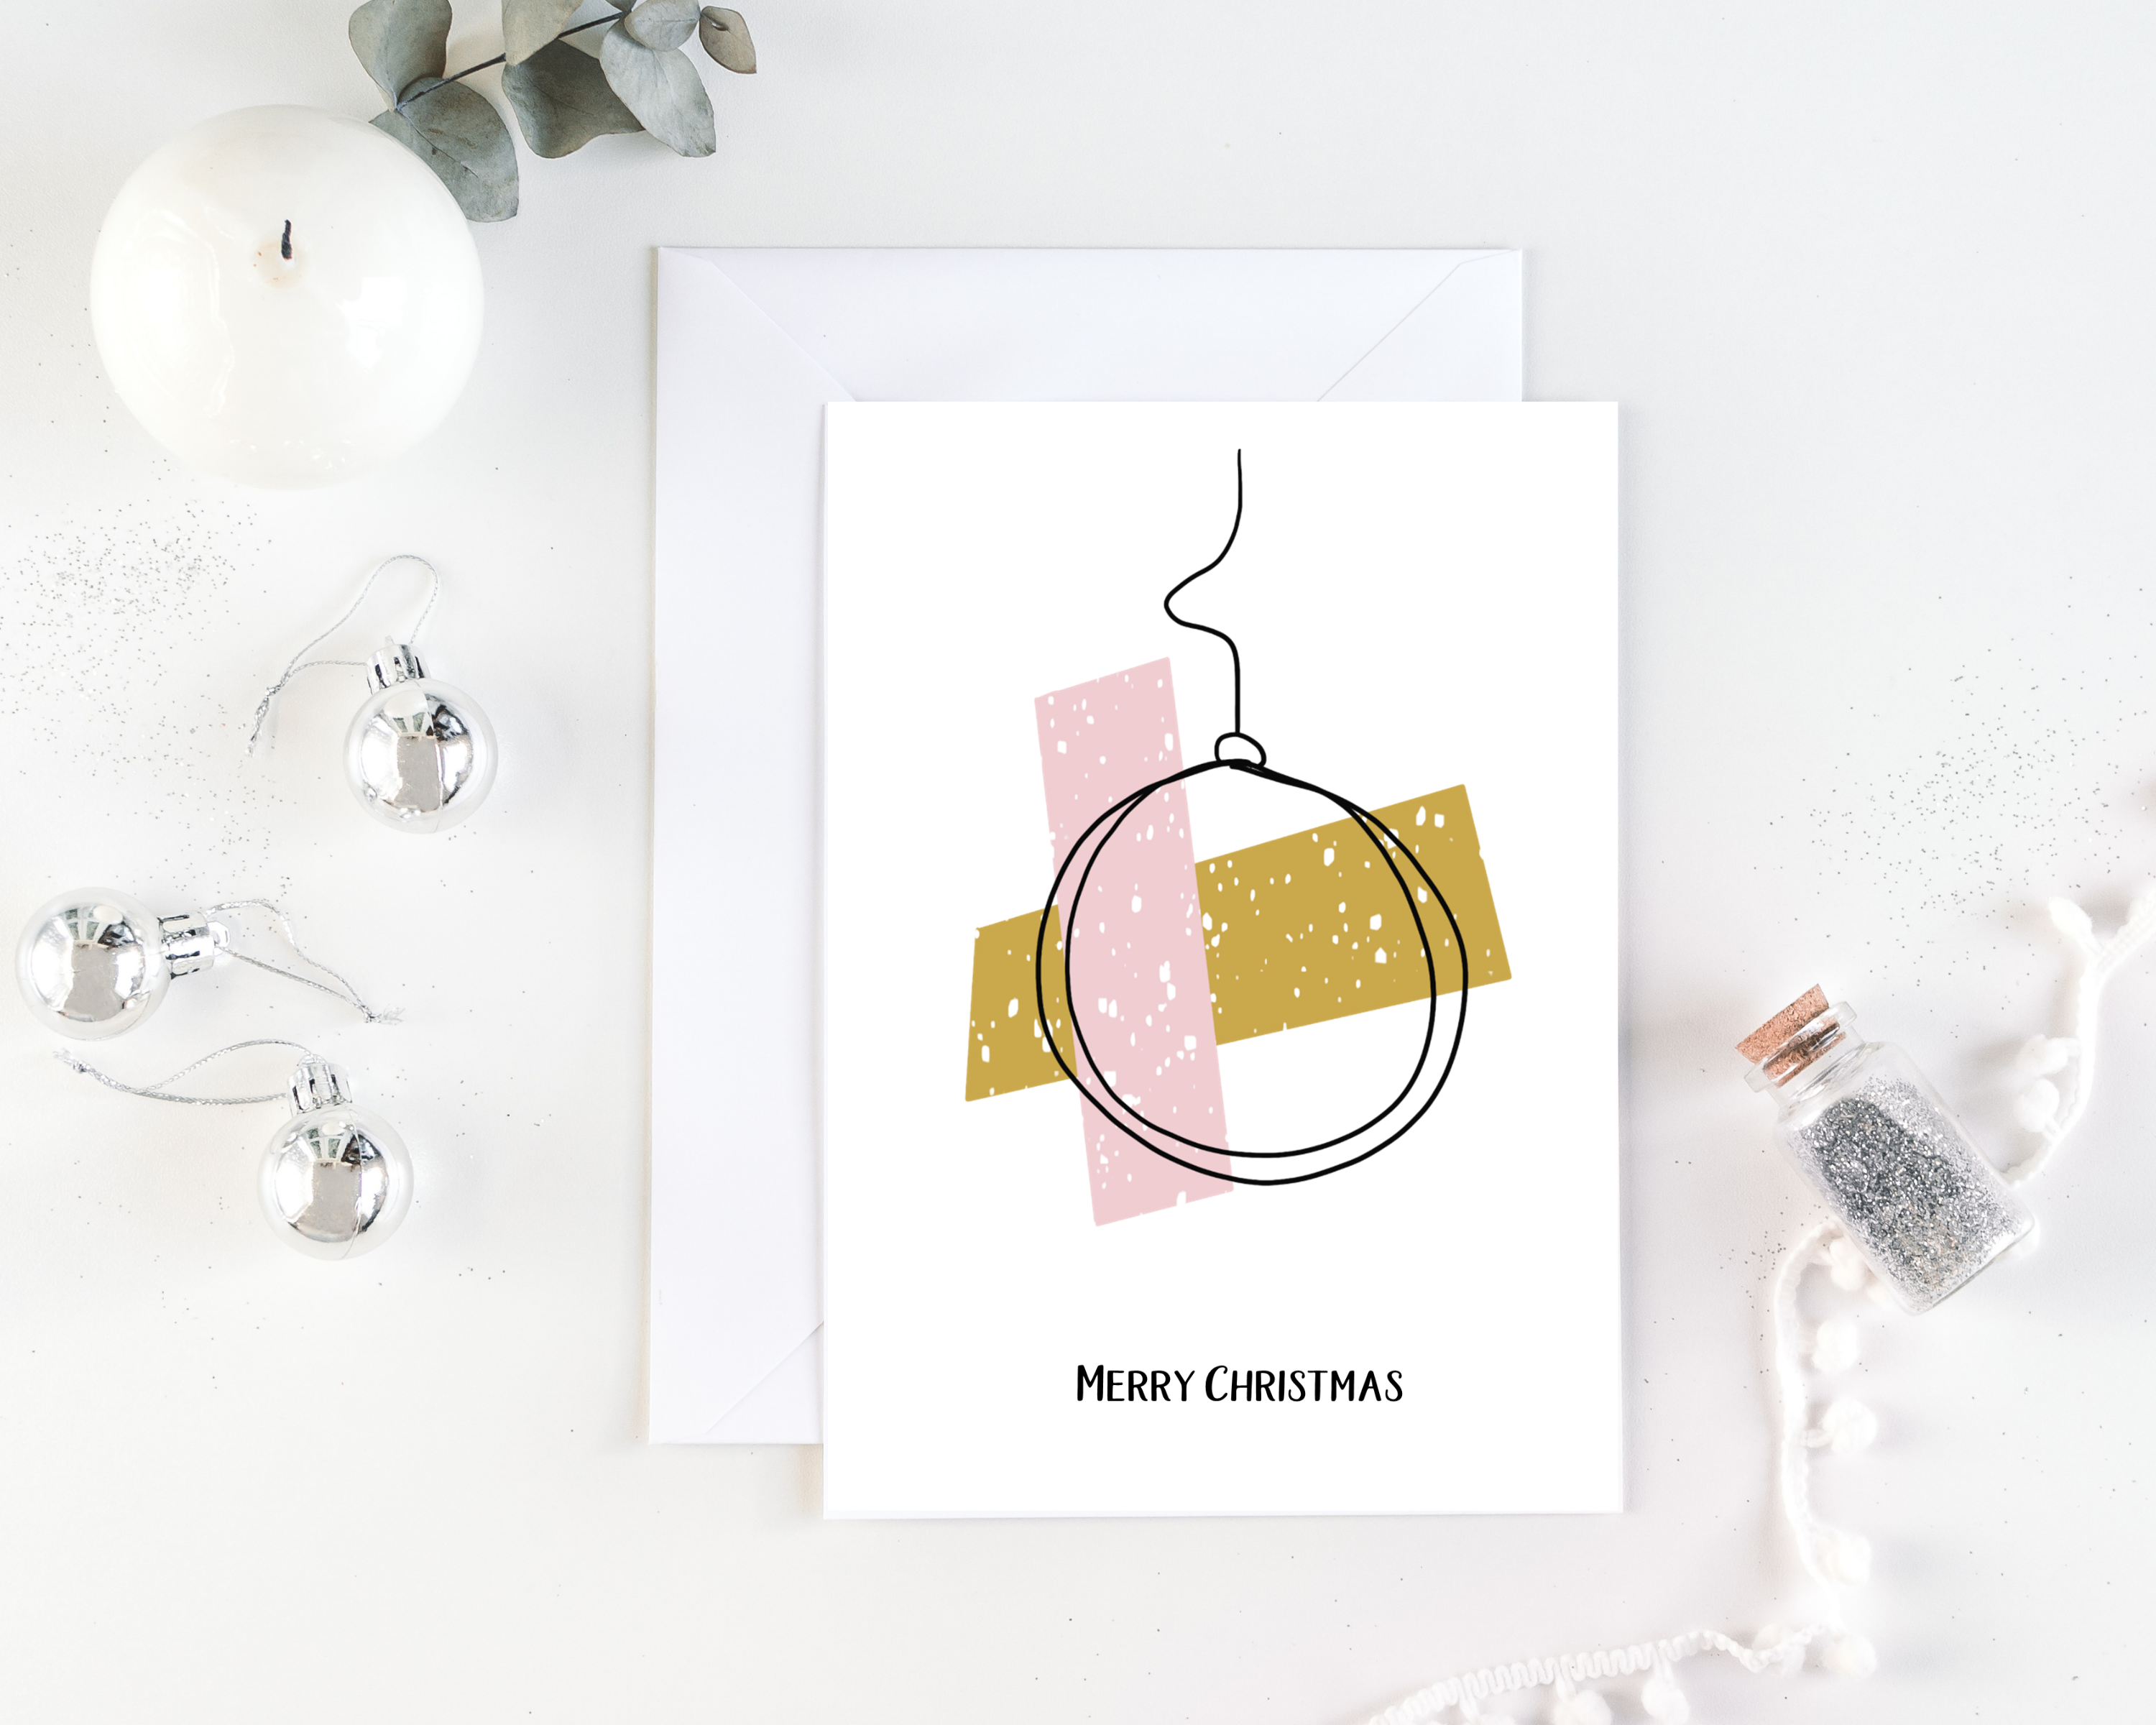 Bauble Design of Poppleberry A6 Abstract, Blush Pink & Gold Christmas Cards on White Cardstock and White Envelope.